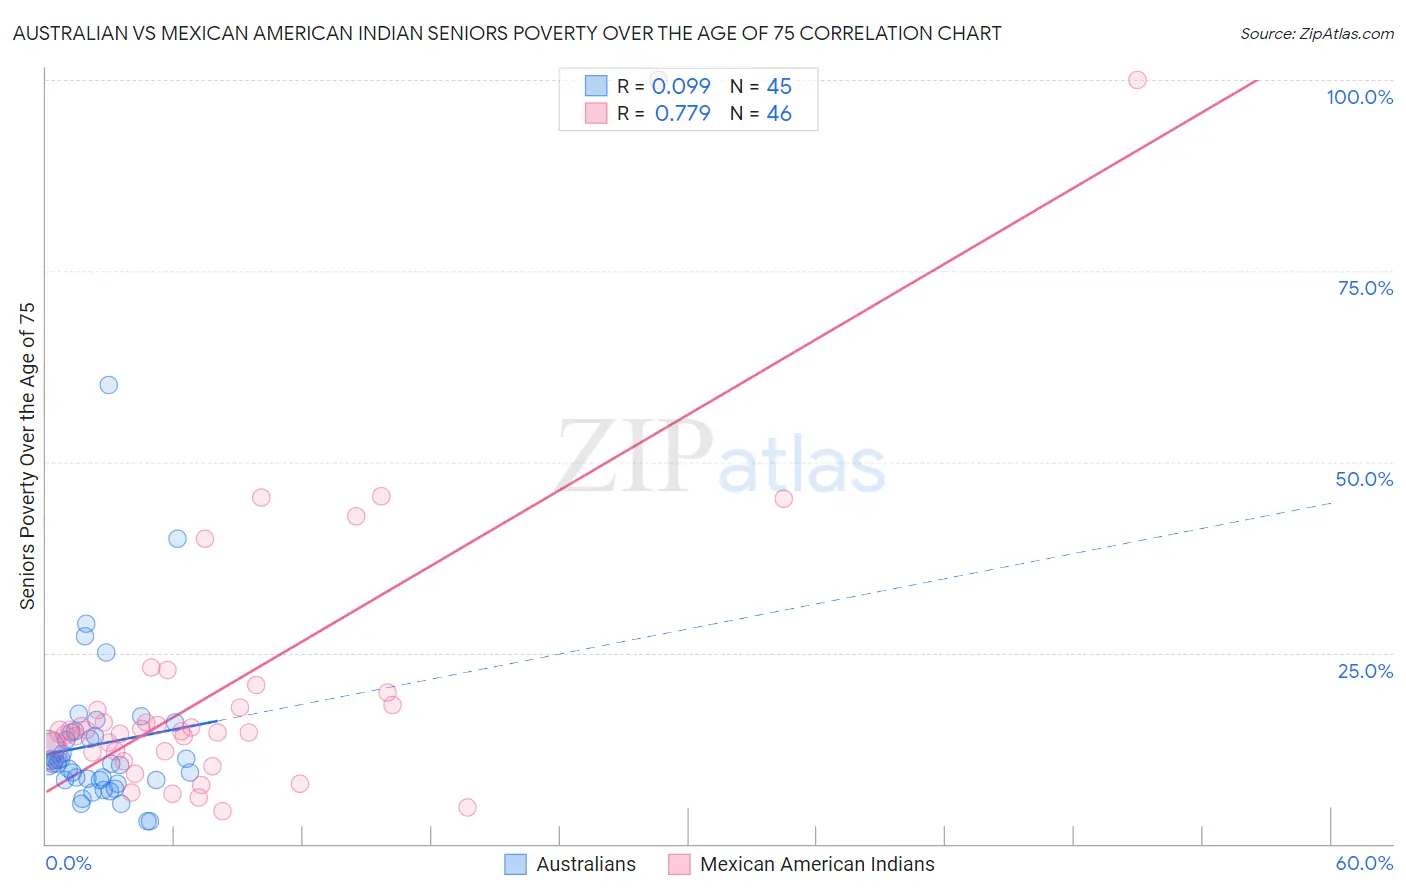 Australian vs Mexican American Indian Seniors Poverty Over the Age of 75